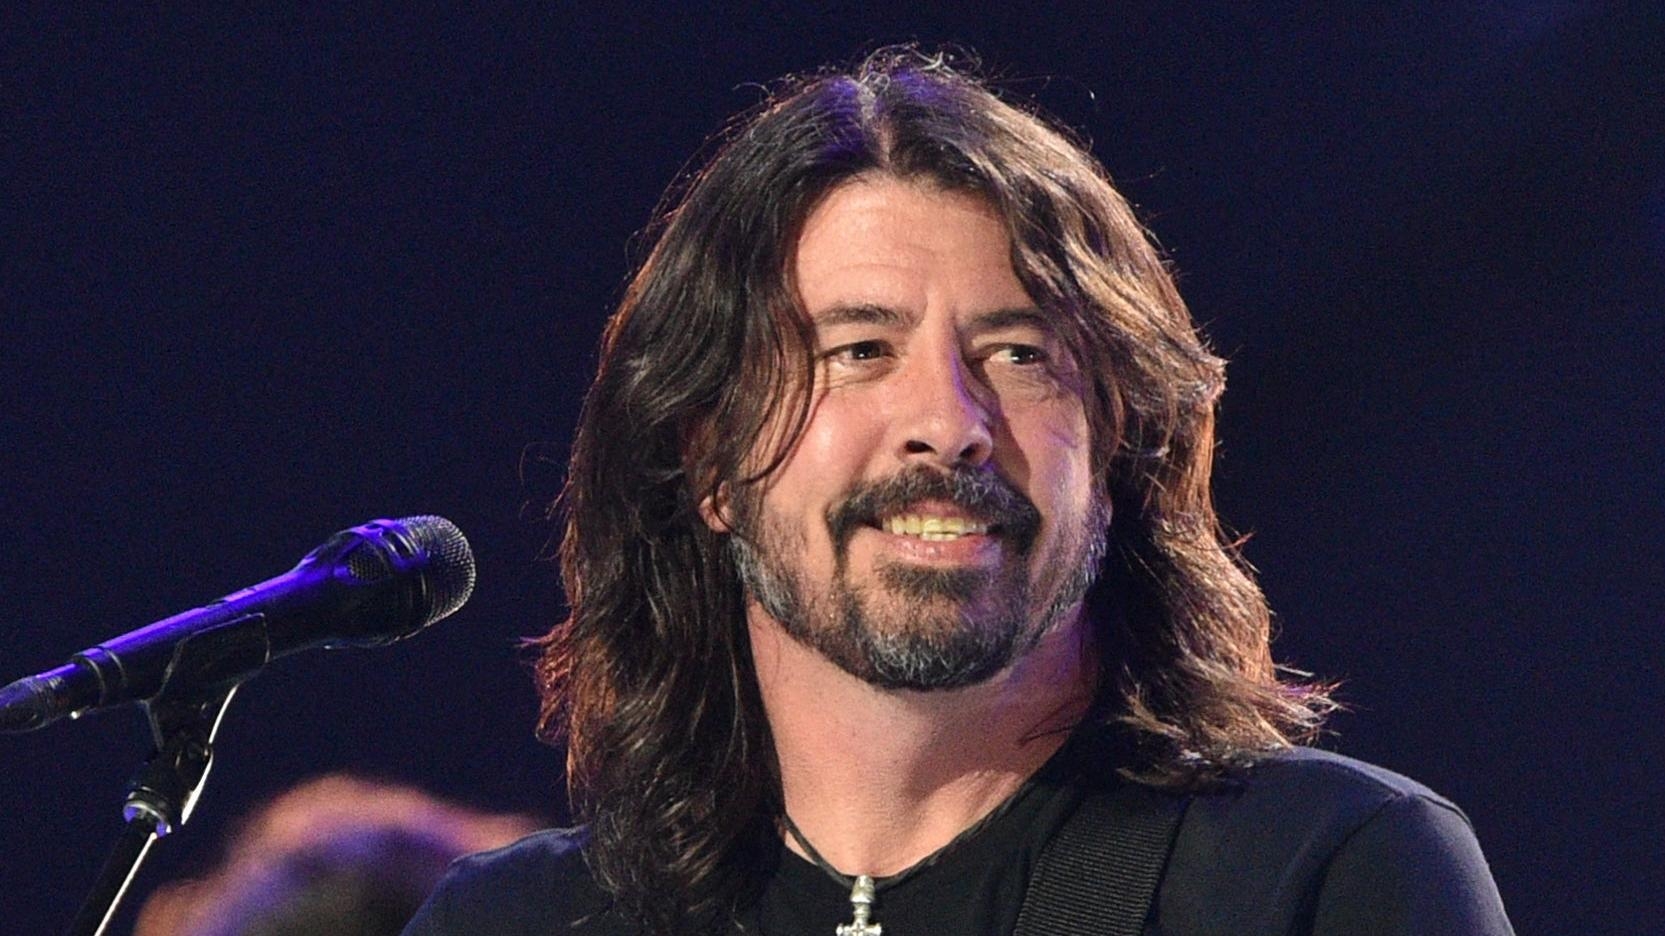 Dave Grohl suggests new cover art for Nevermind is on the way